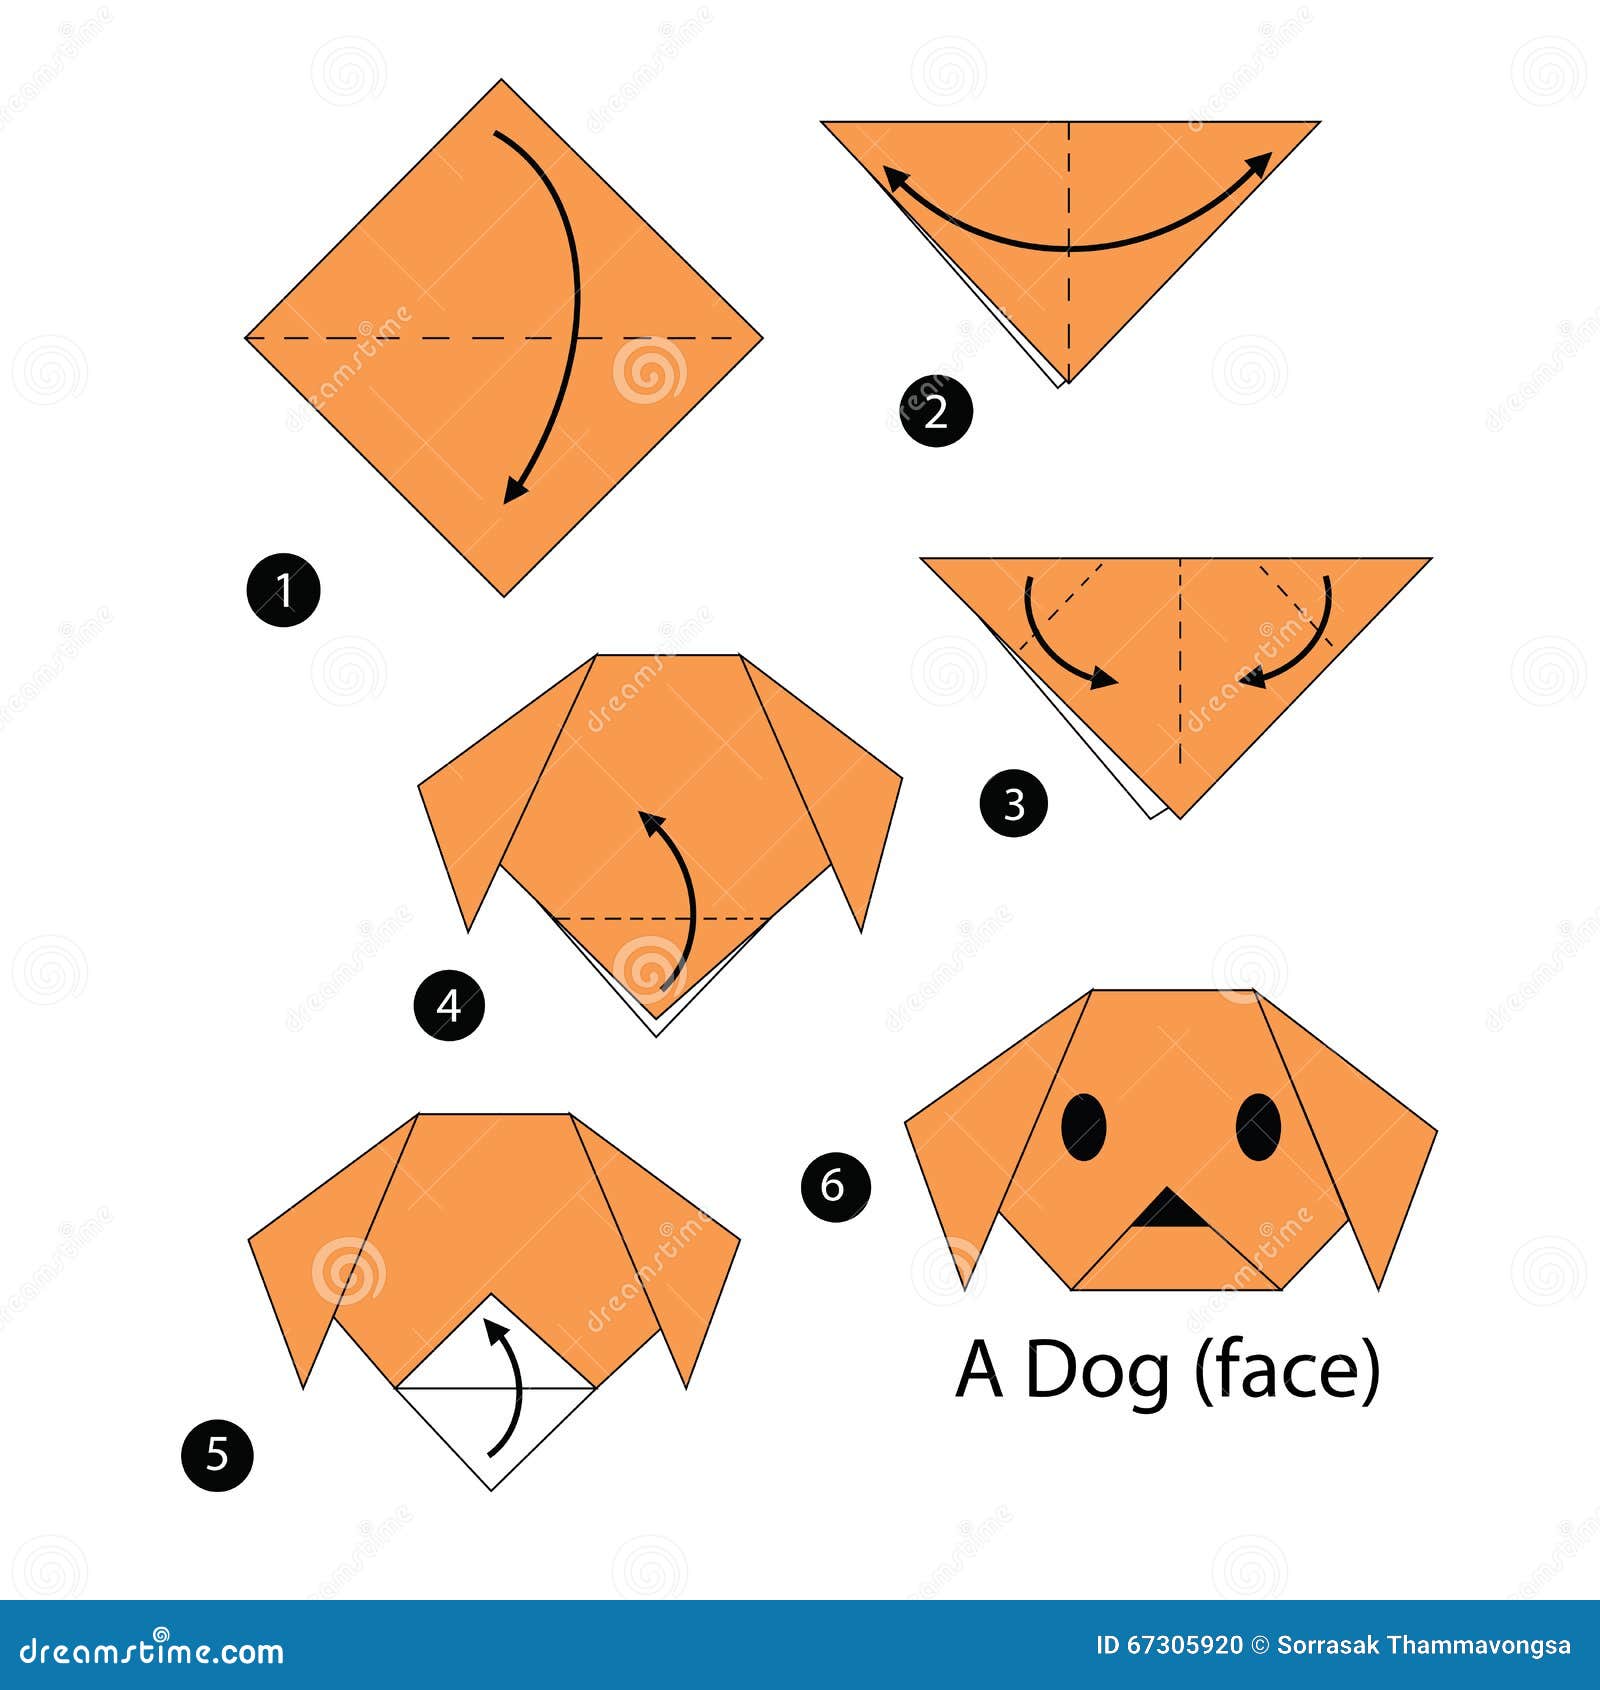 step by step instructions how to make origami dog.